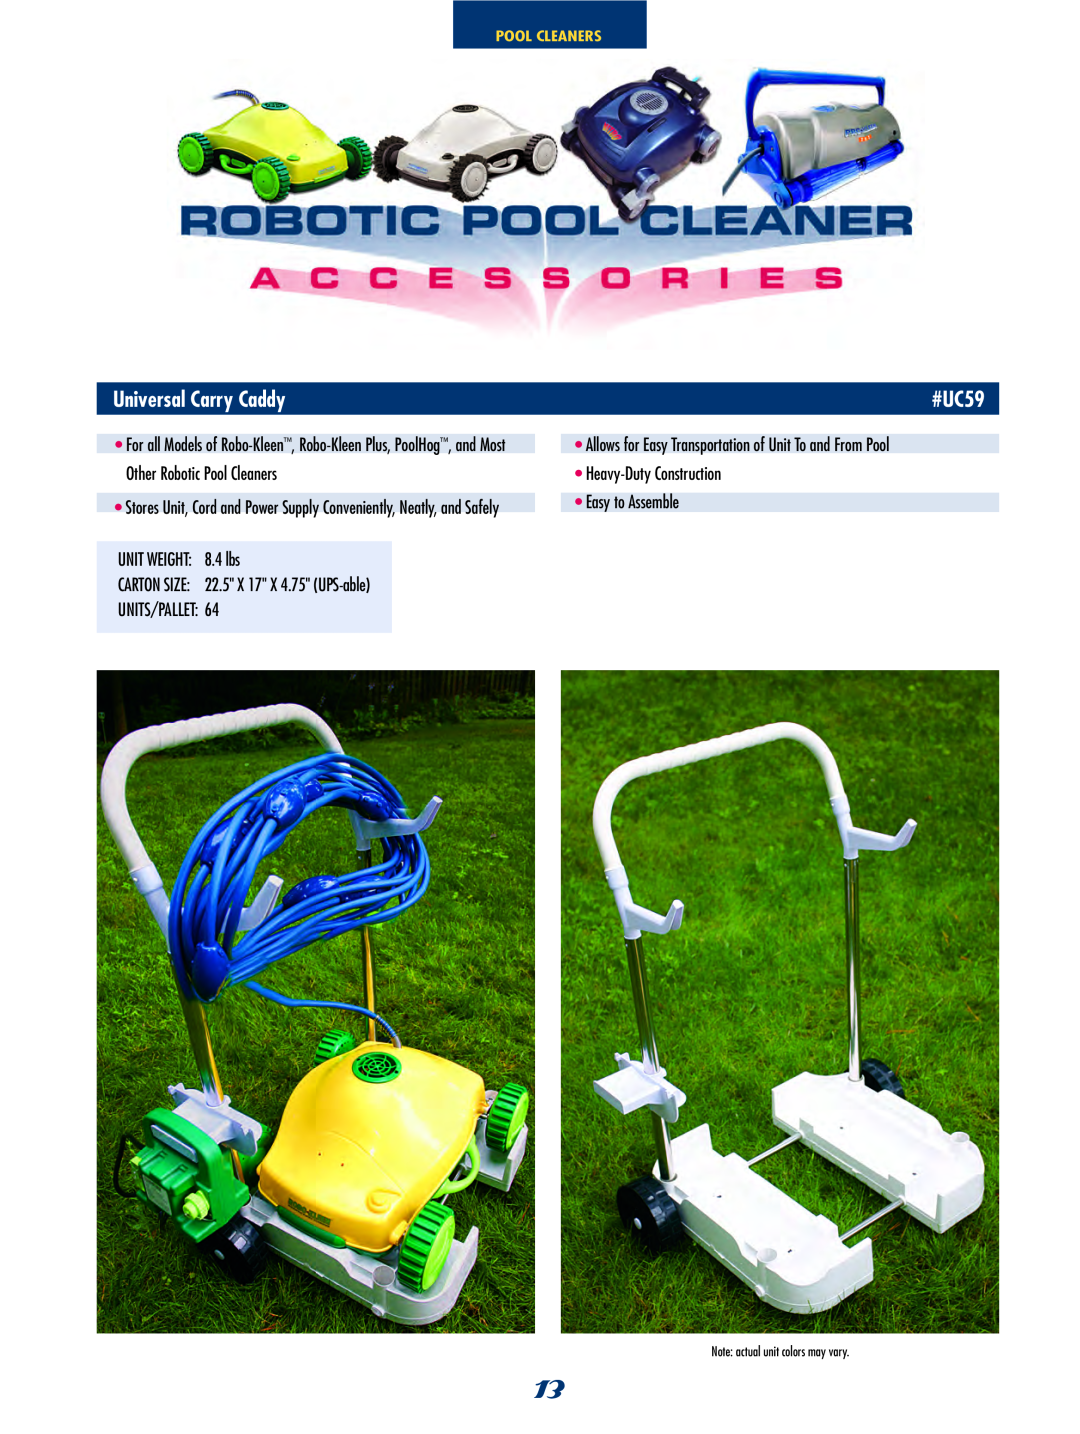 SmartPool Inc NC31 Universal Carry Caddy, #UC59, Other Robotic Pool Cleaners, • Heavy-DutyConstruction, • Easy to Assemble 